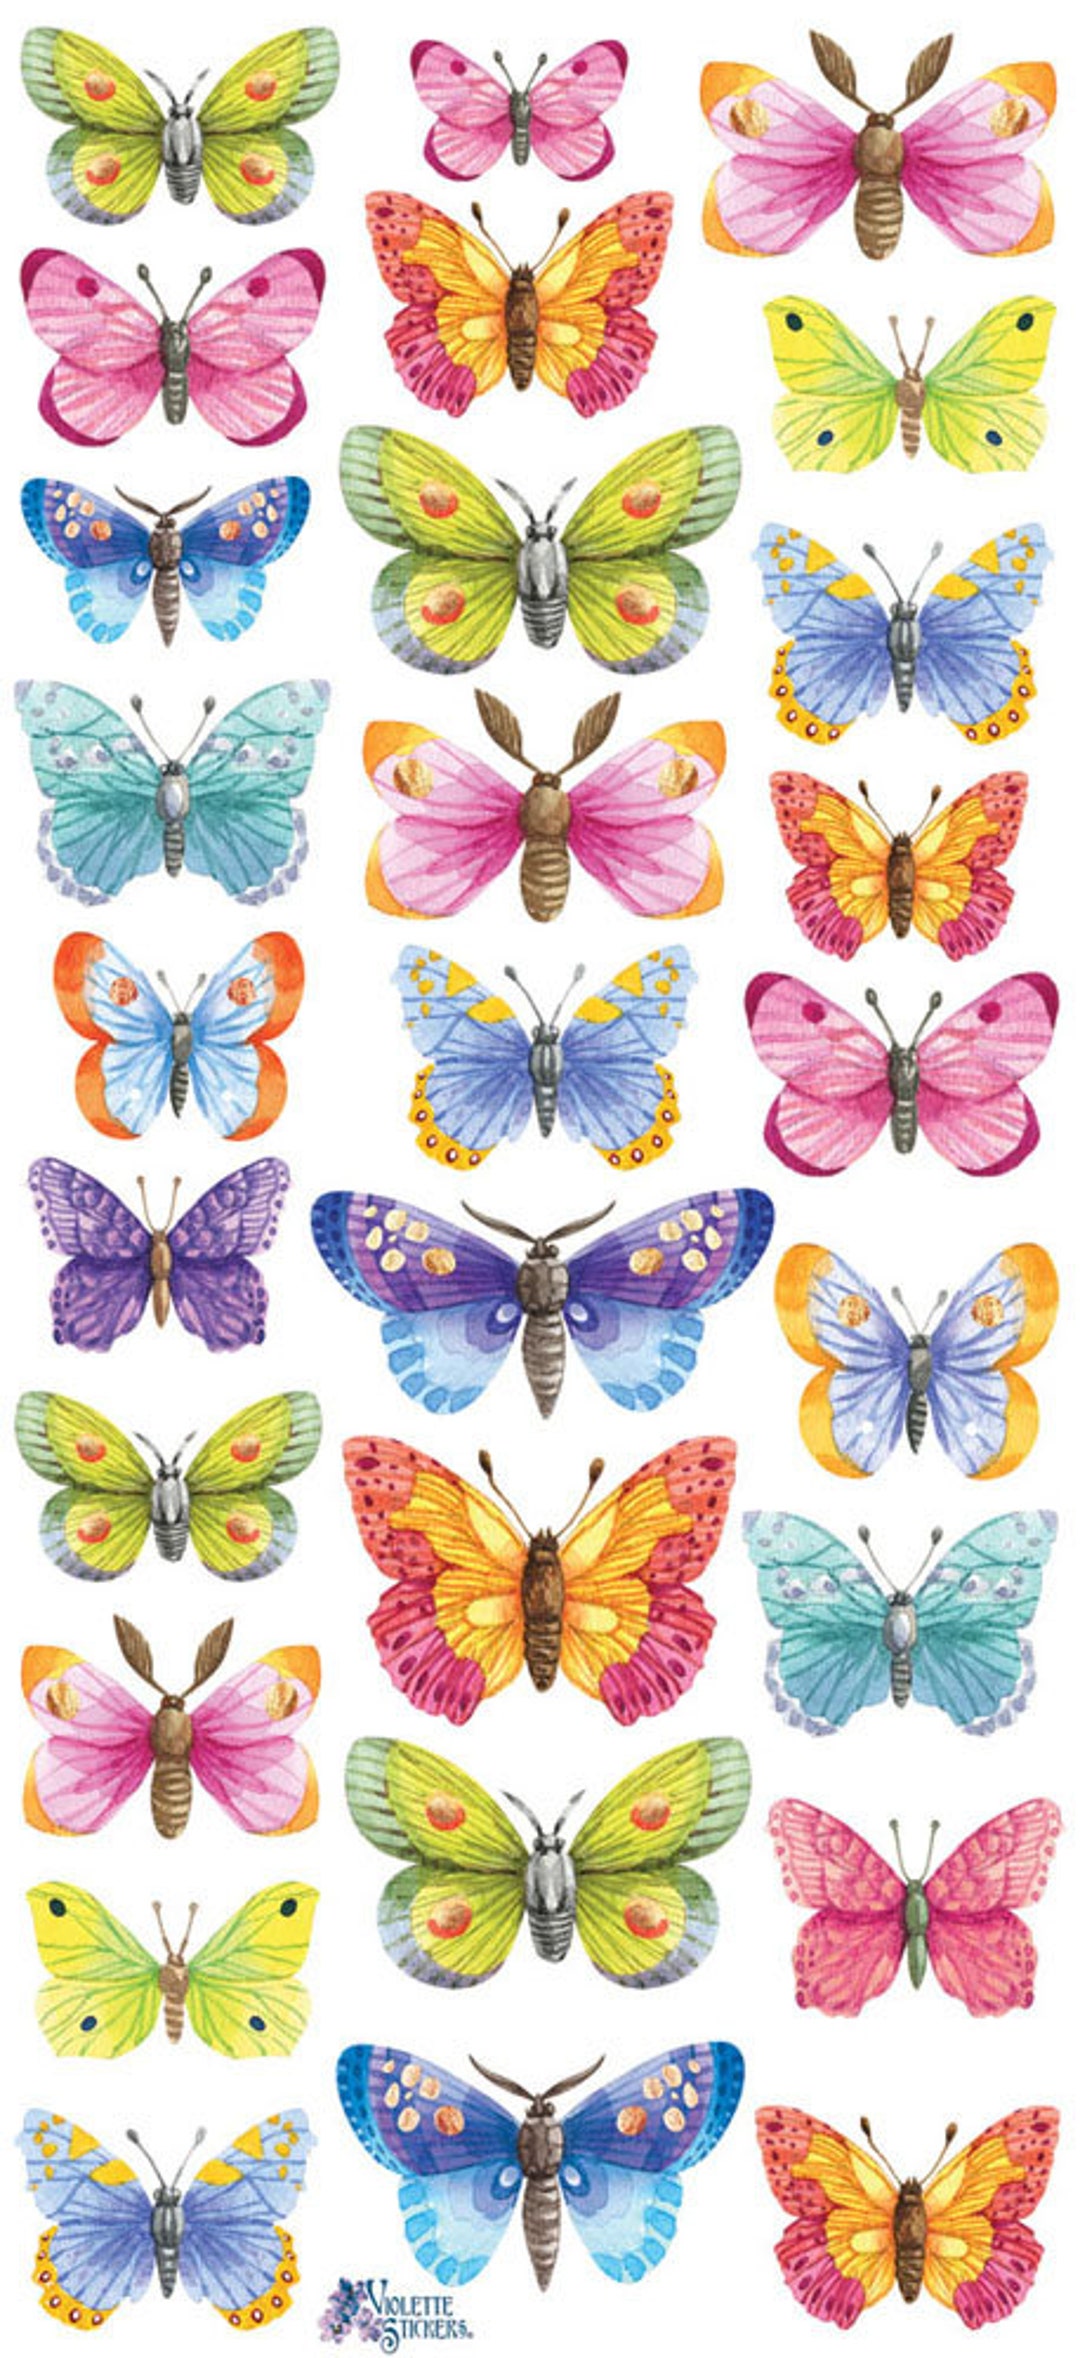 36 Sheets Transparent Butterfly Stickers For Kids, Classroom